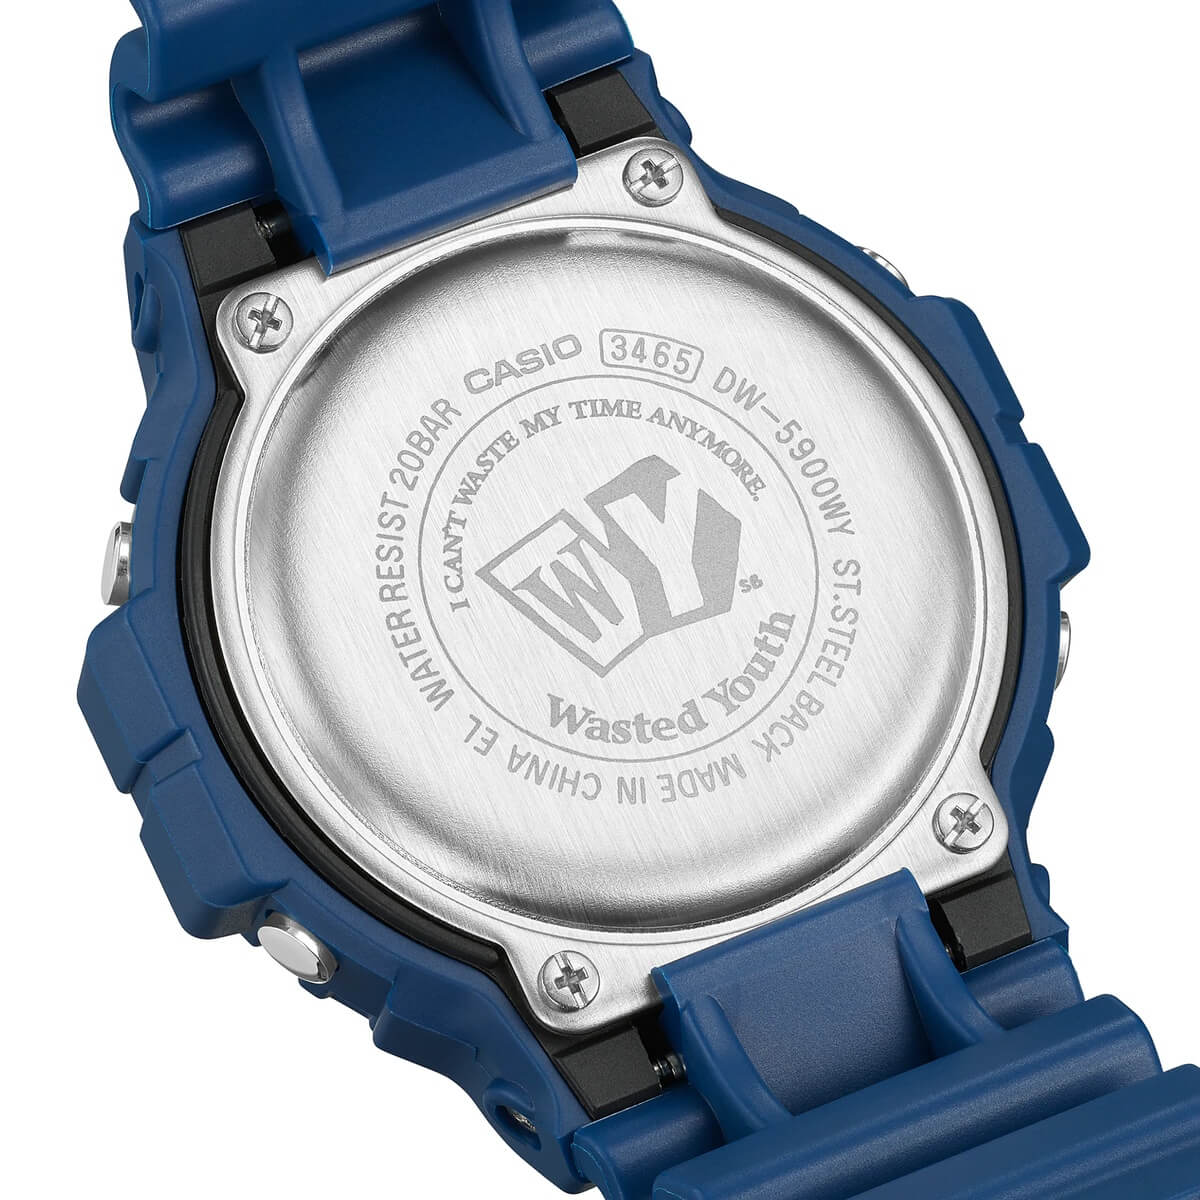 Wasted Youth x G-Shock DW-5900WY-2 collaboration features the 